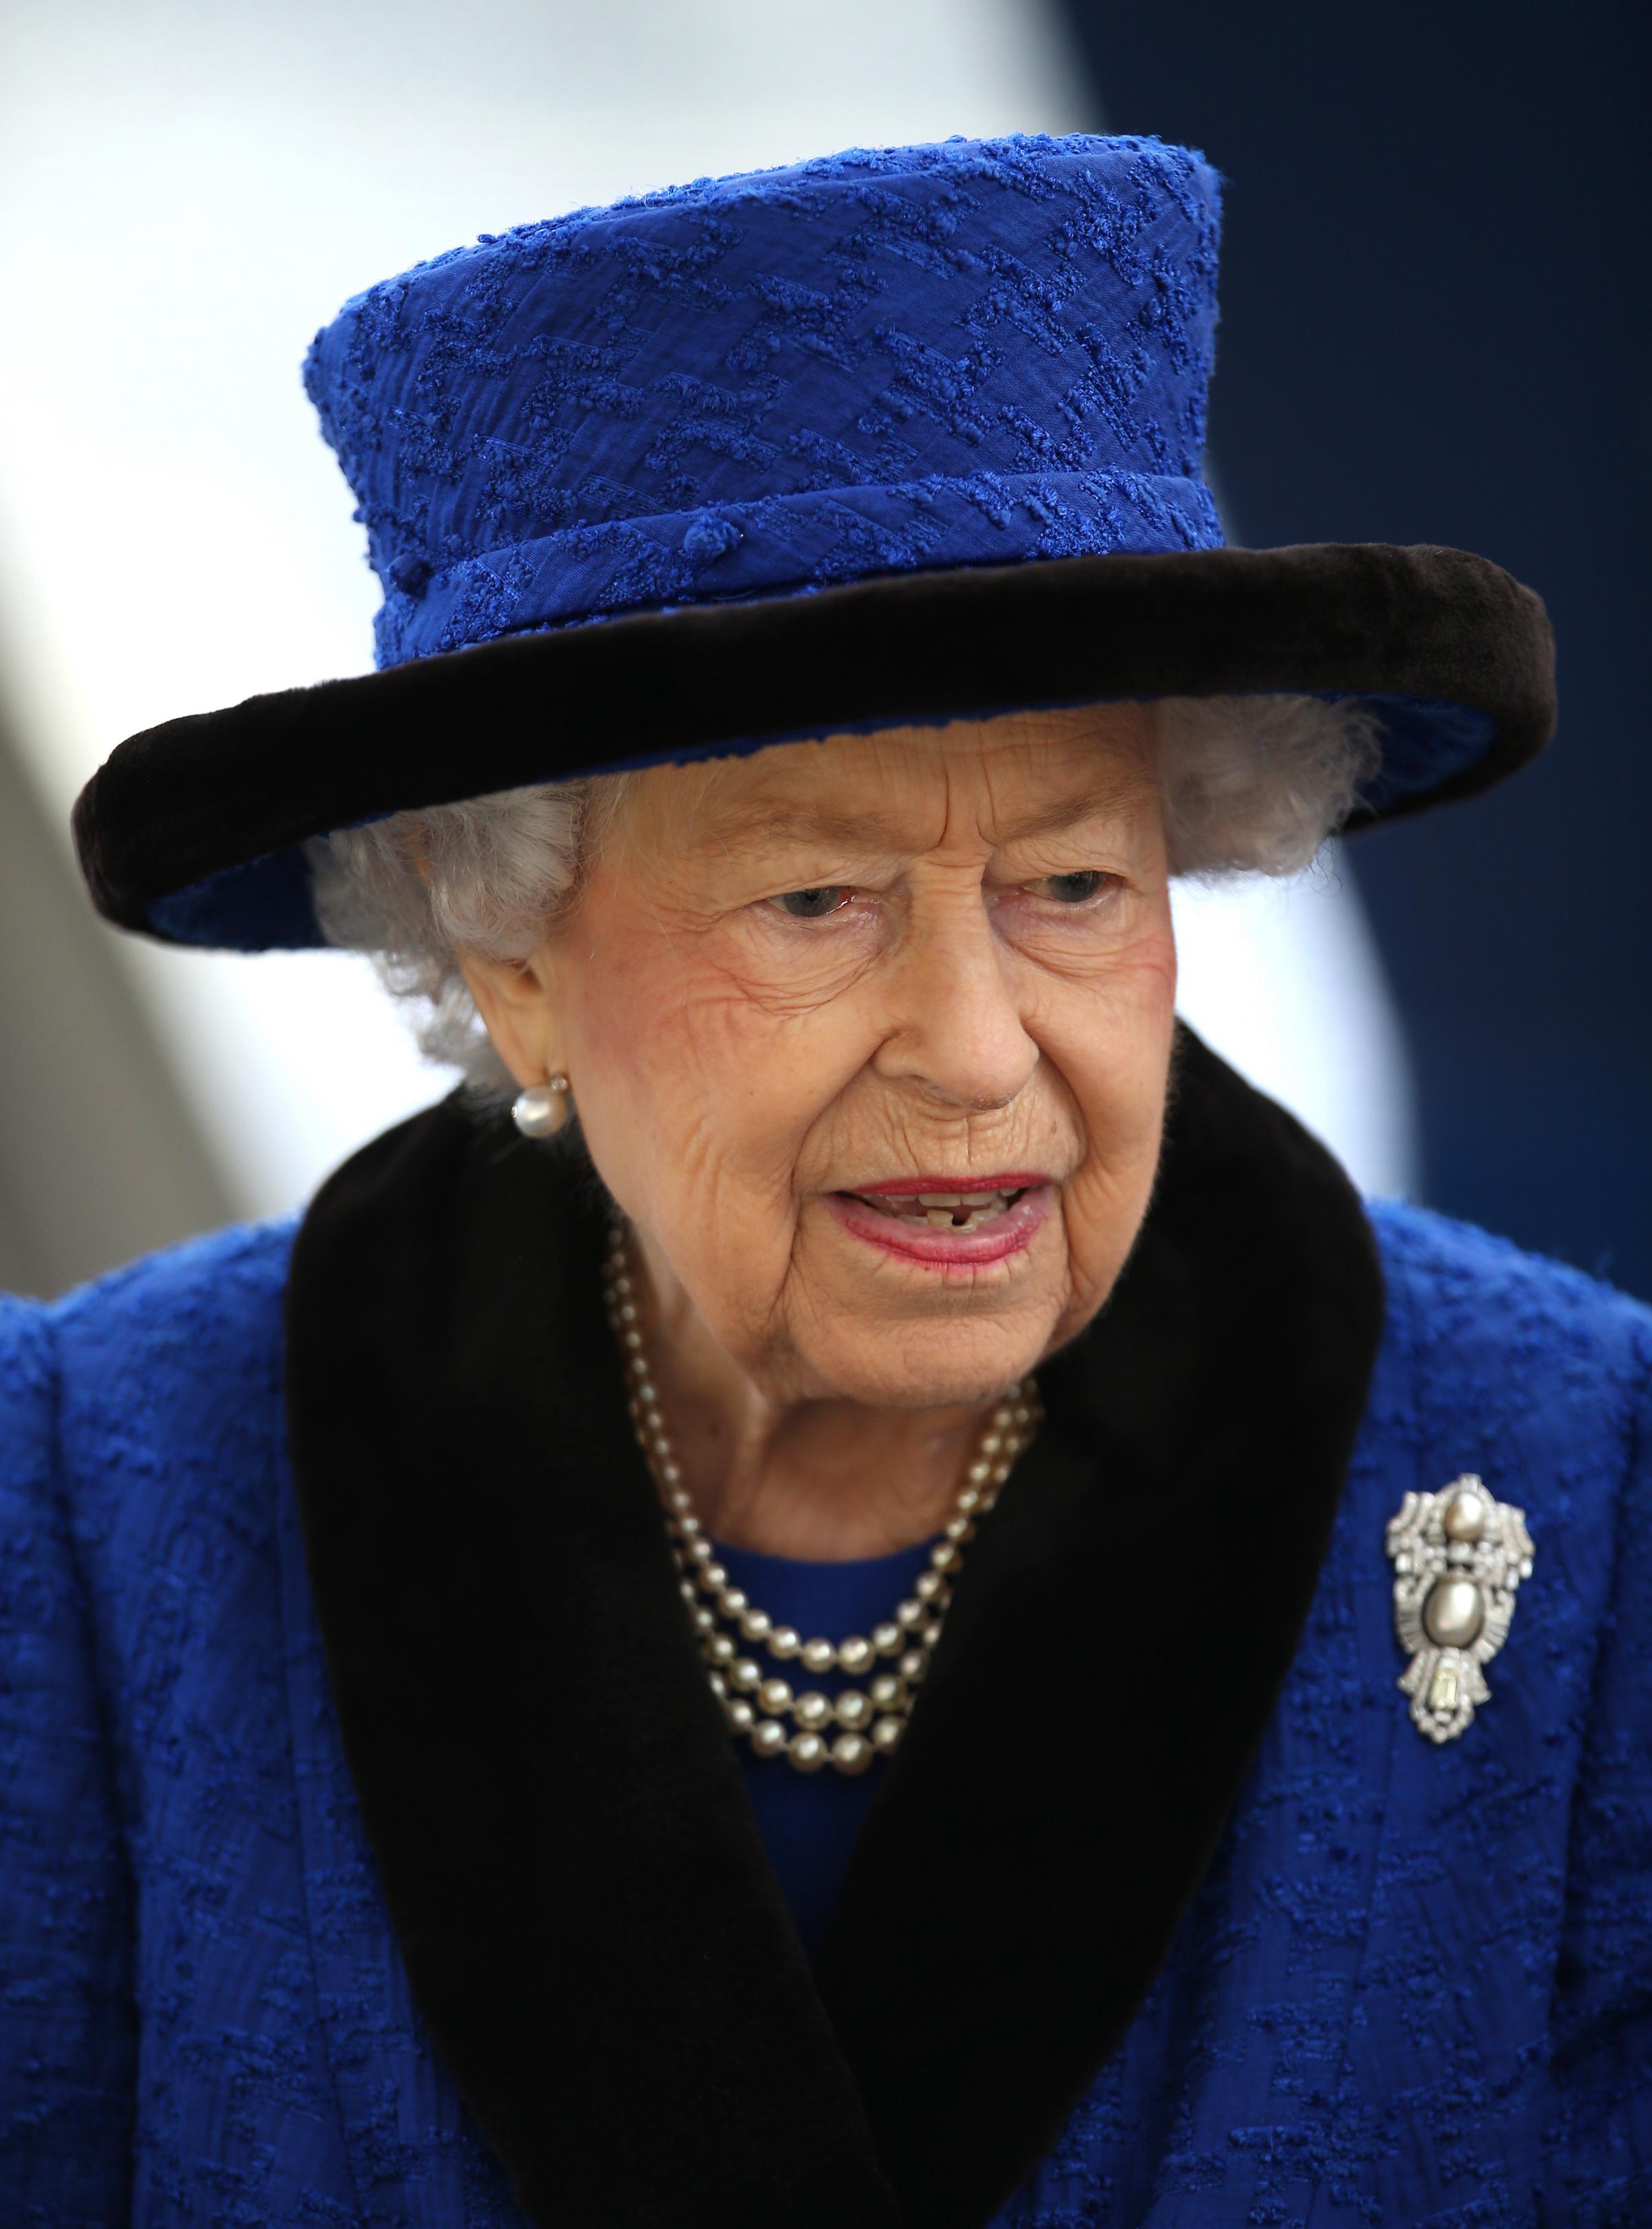 The Queen marks her Platinum Jubilee this year